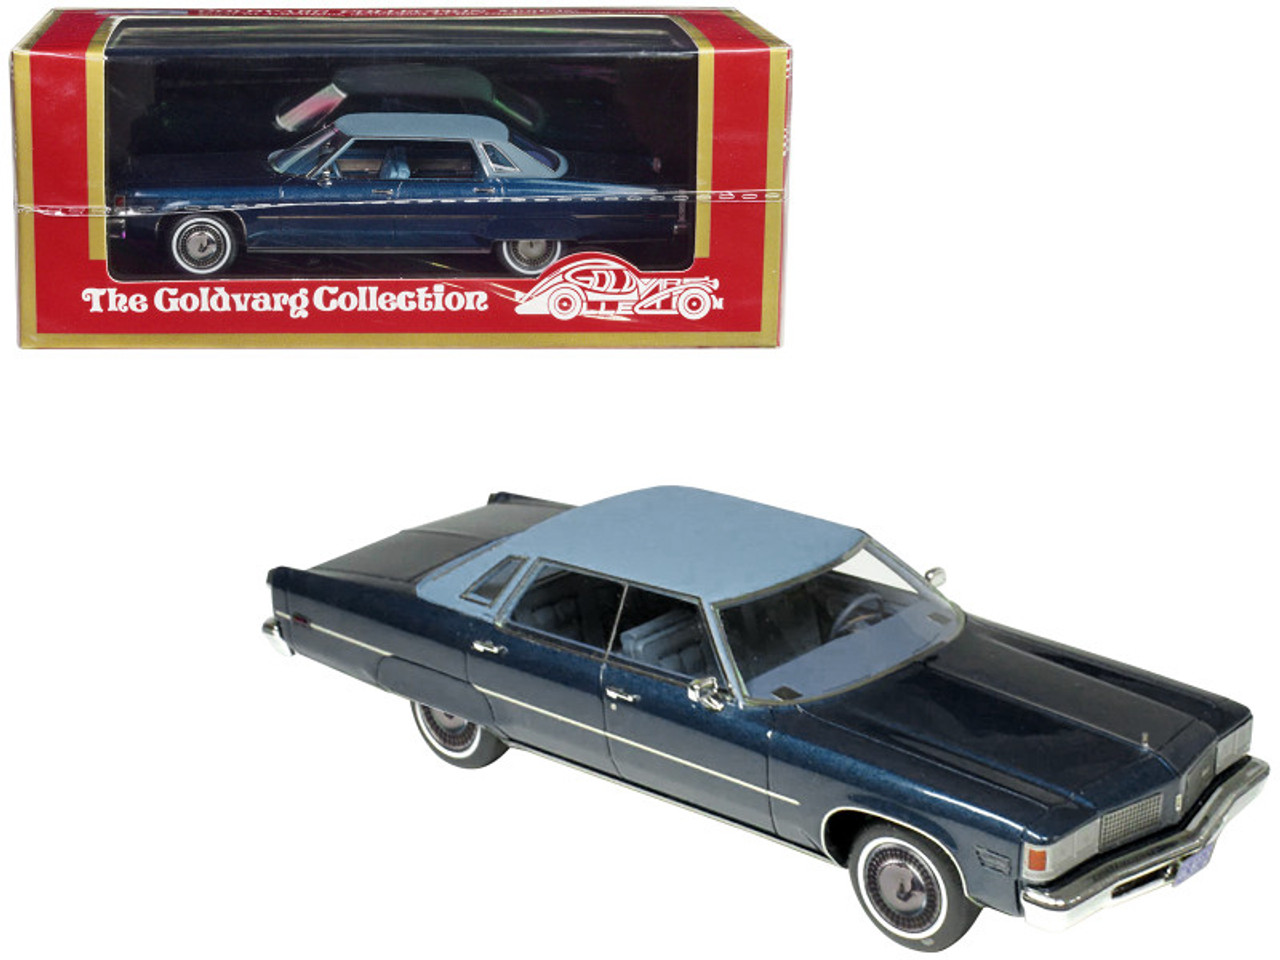 1976 Oldsmobile 98 Regency Sedan Dark Blue Metallic with Light Blue Top and Interior Limited Edition to 200 pieces Worldwide 1/43 Model Car by Goldvarg Collection